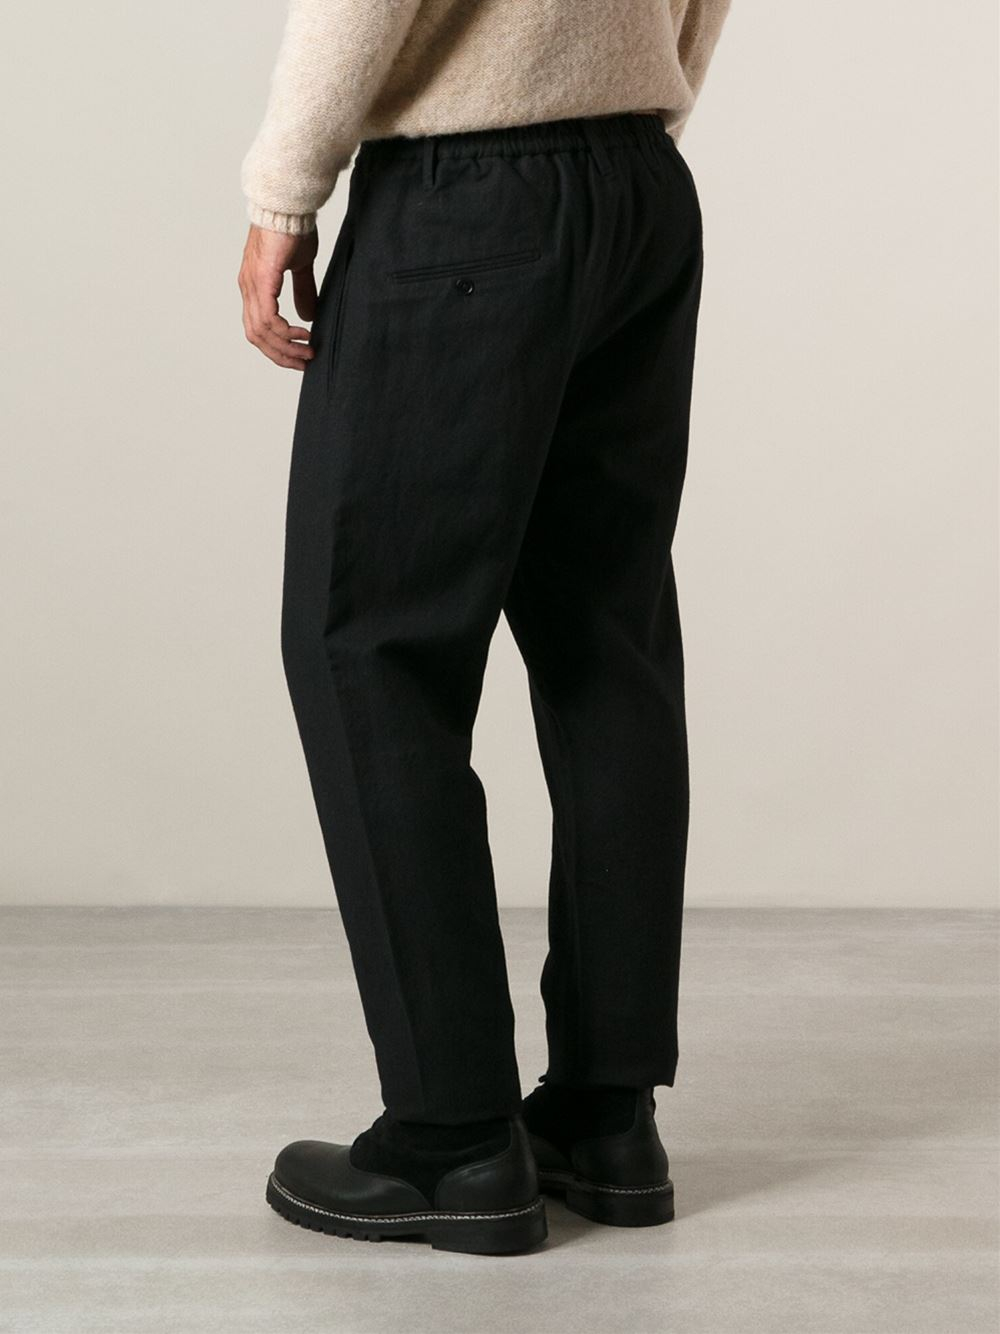 Lyst - Lemaire Relaxed Fit Trouser in Black for Men